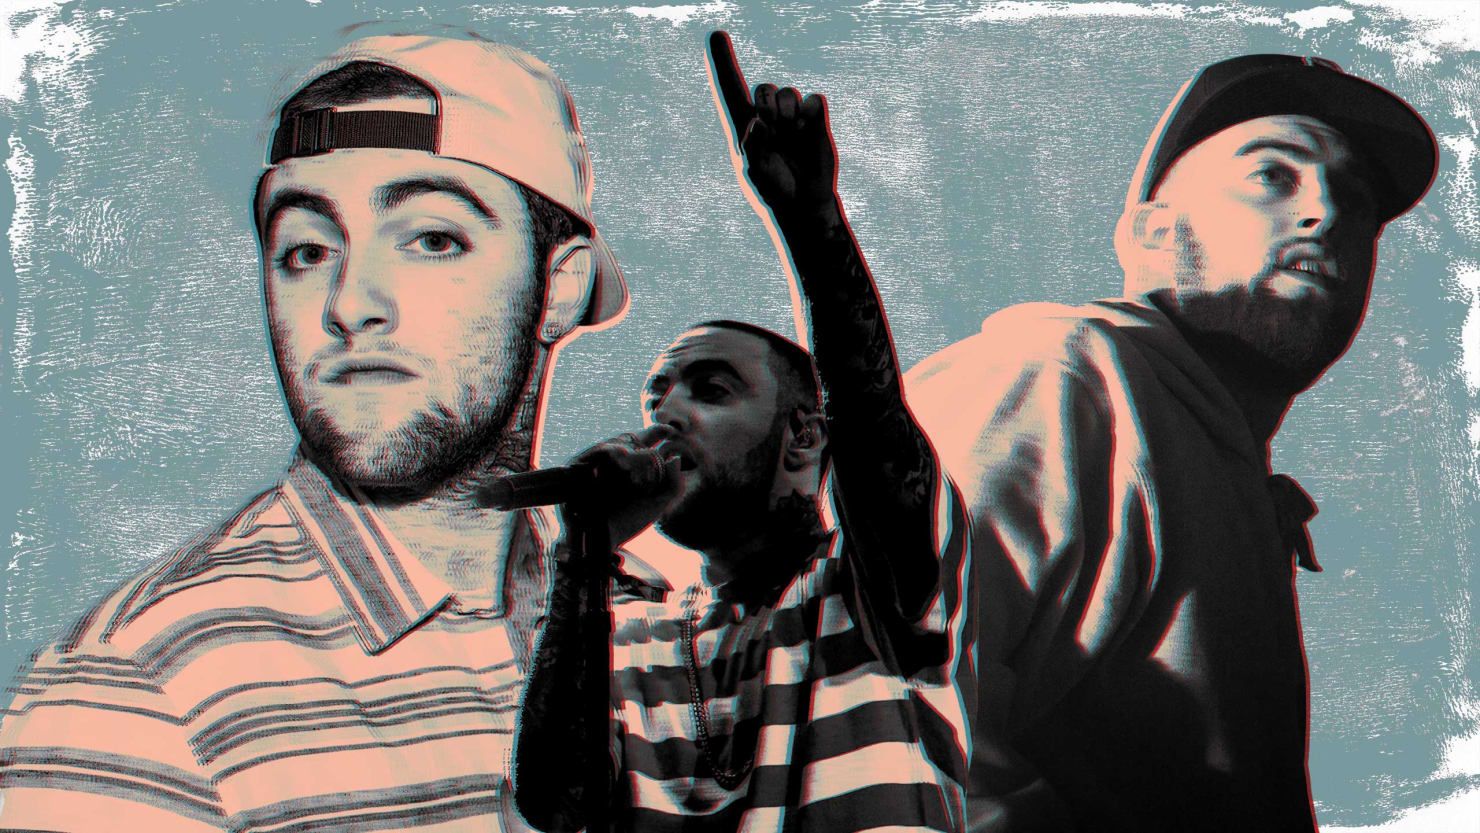 A toxic relationship and toxic publicity: Mac Miller’s death and Ariana Grande’s demonization